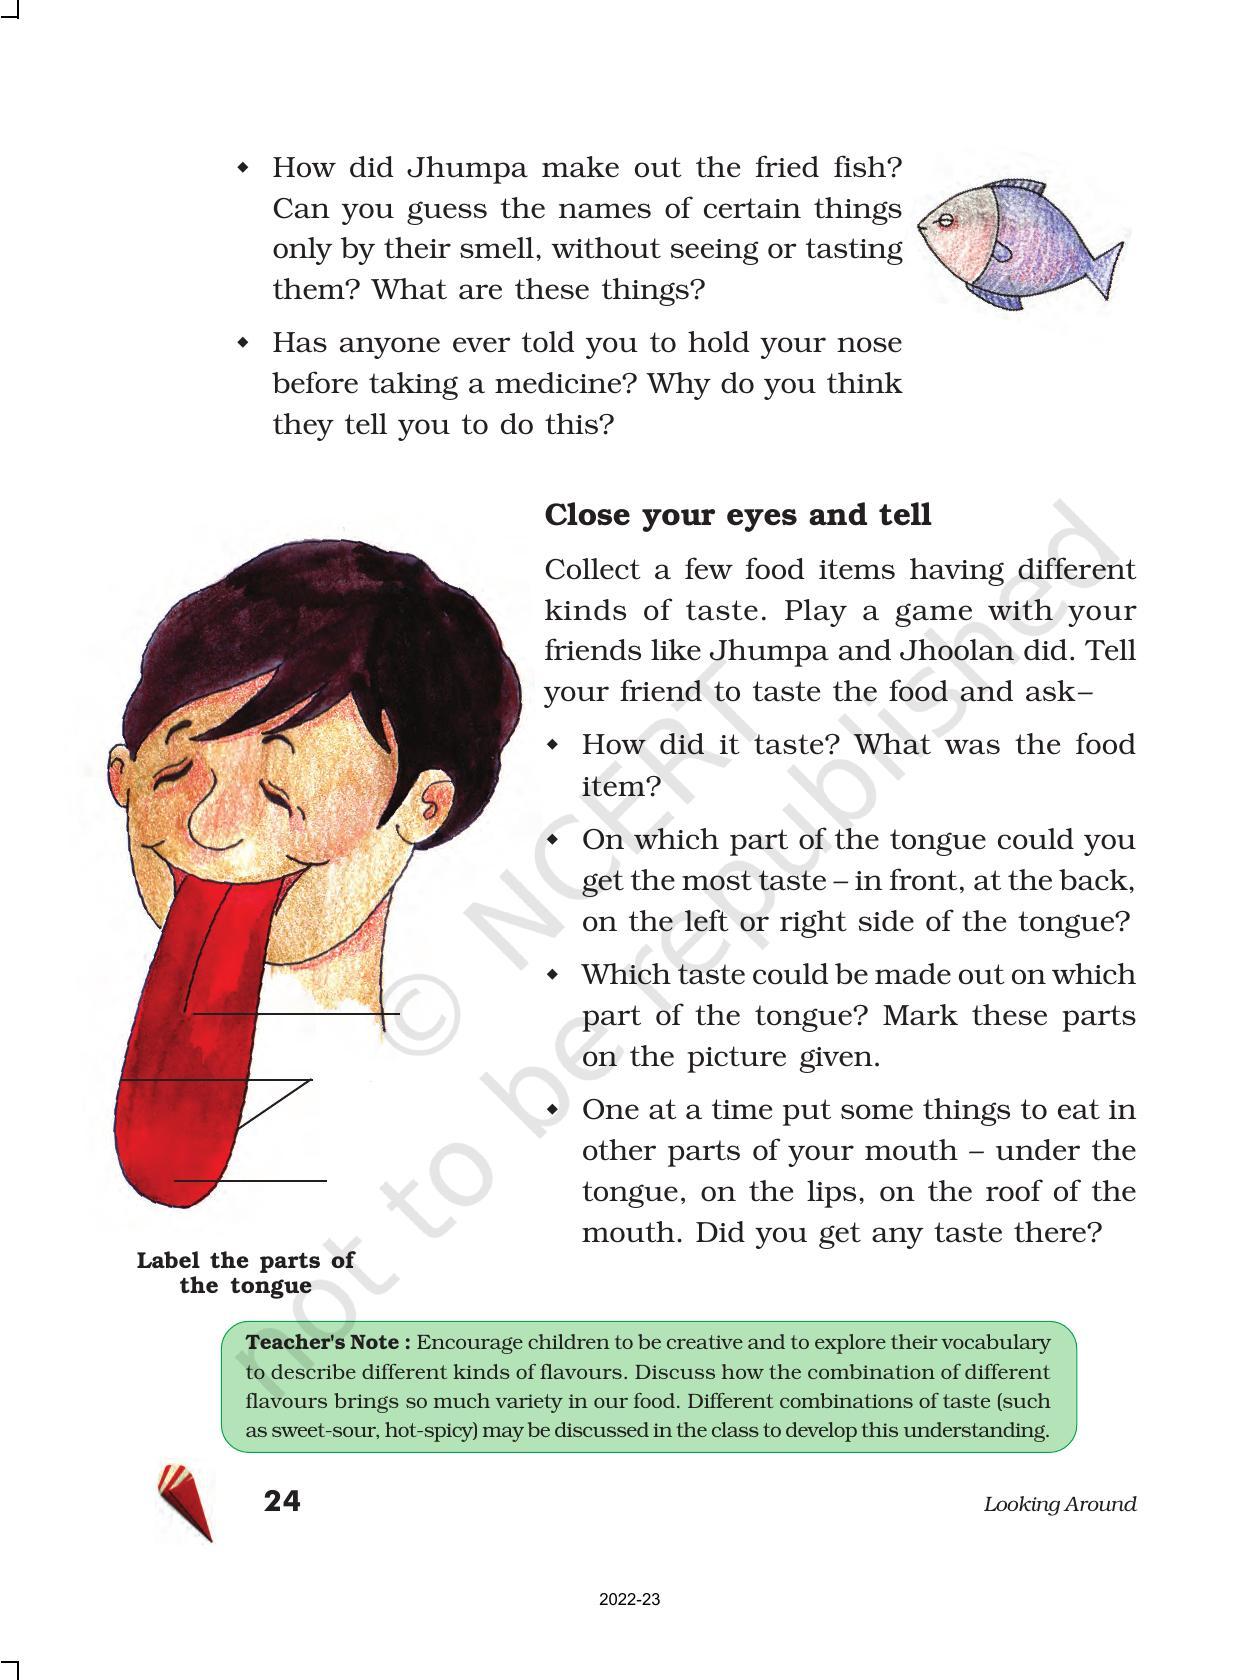 NCERT Book for Class 5 EVS Chapter 3 From Tasting to Digesting - Page 3